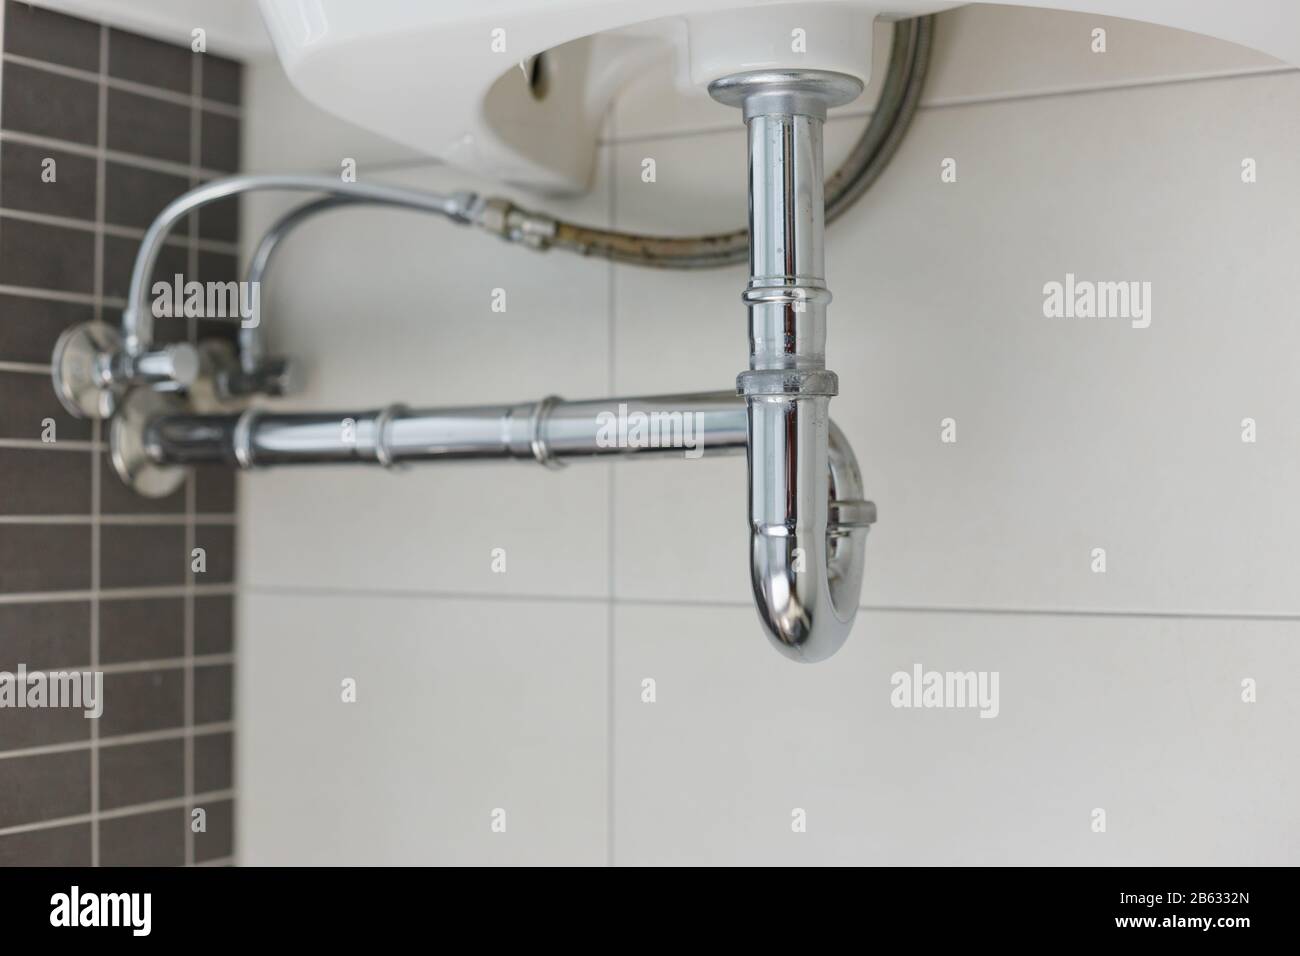 metal sink siphon and drain in white bathroom Stock Photo